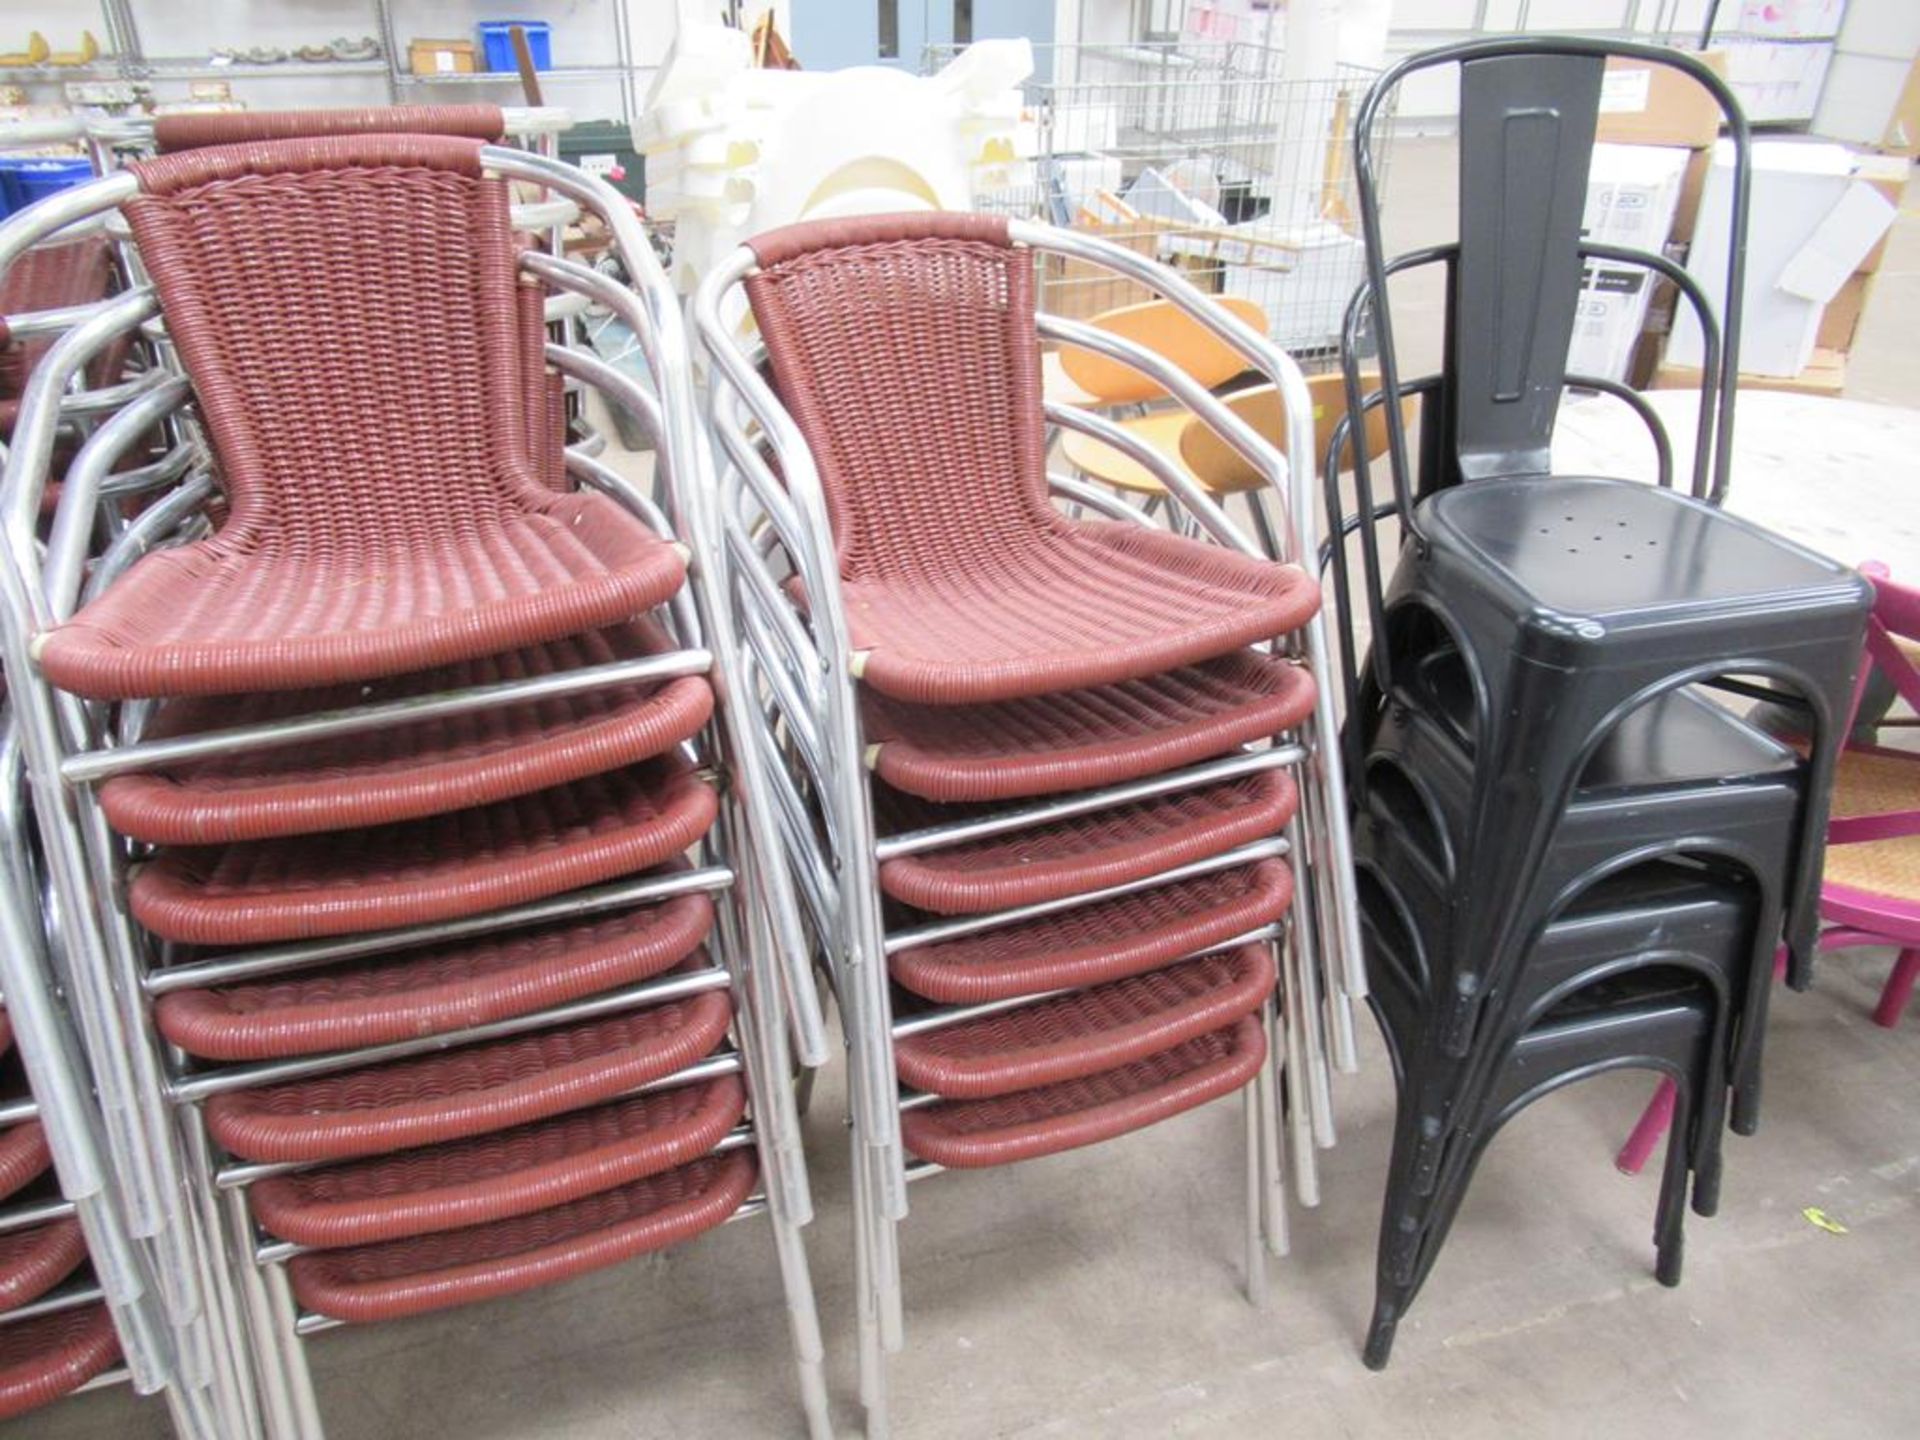 34 x Matching Stackable Chairs, 4 x High Chairs and other various Café Chairs - Image 3 of 3